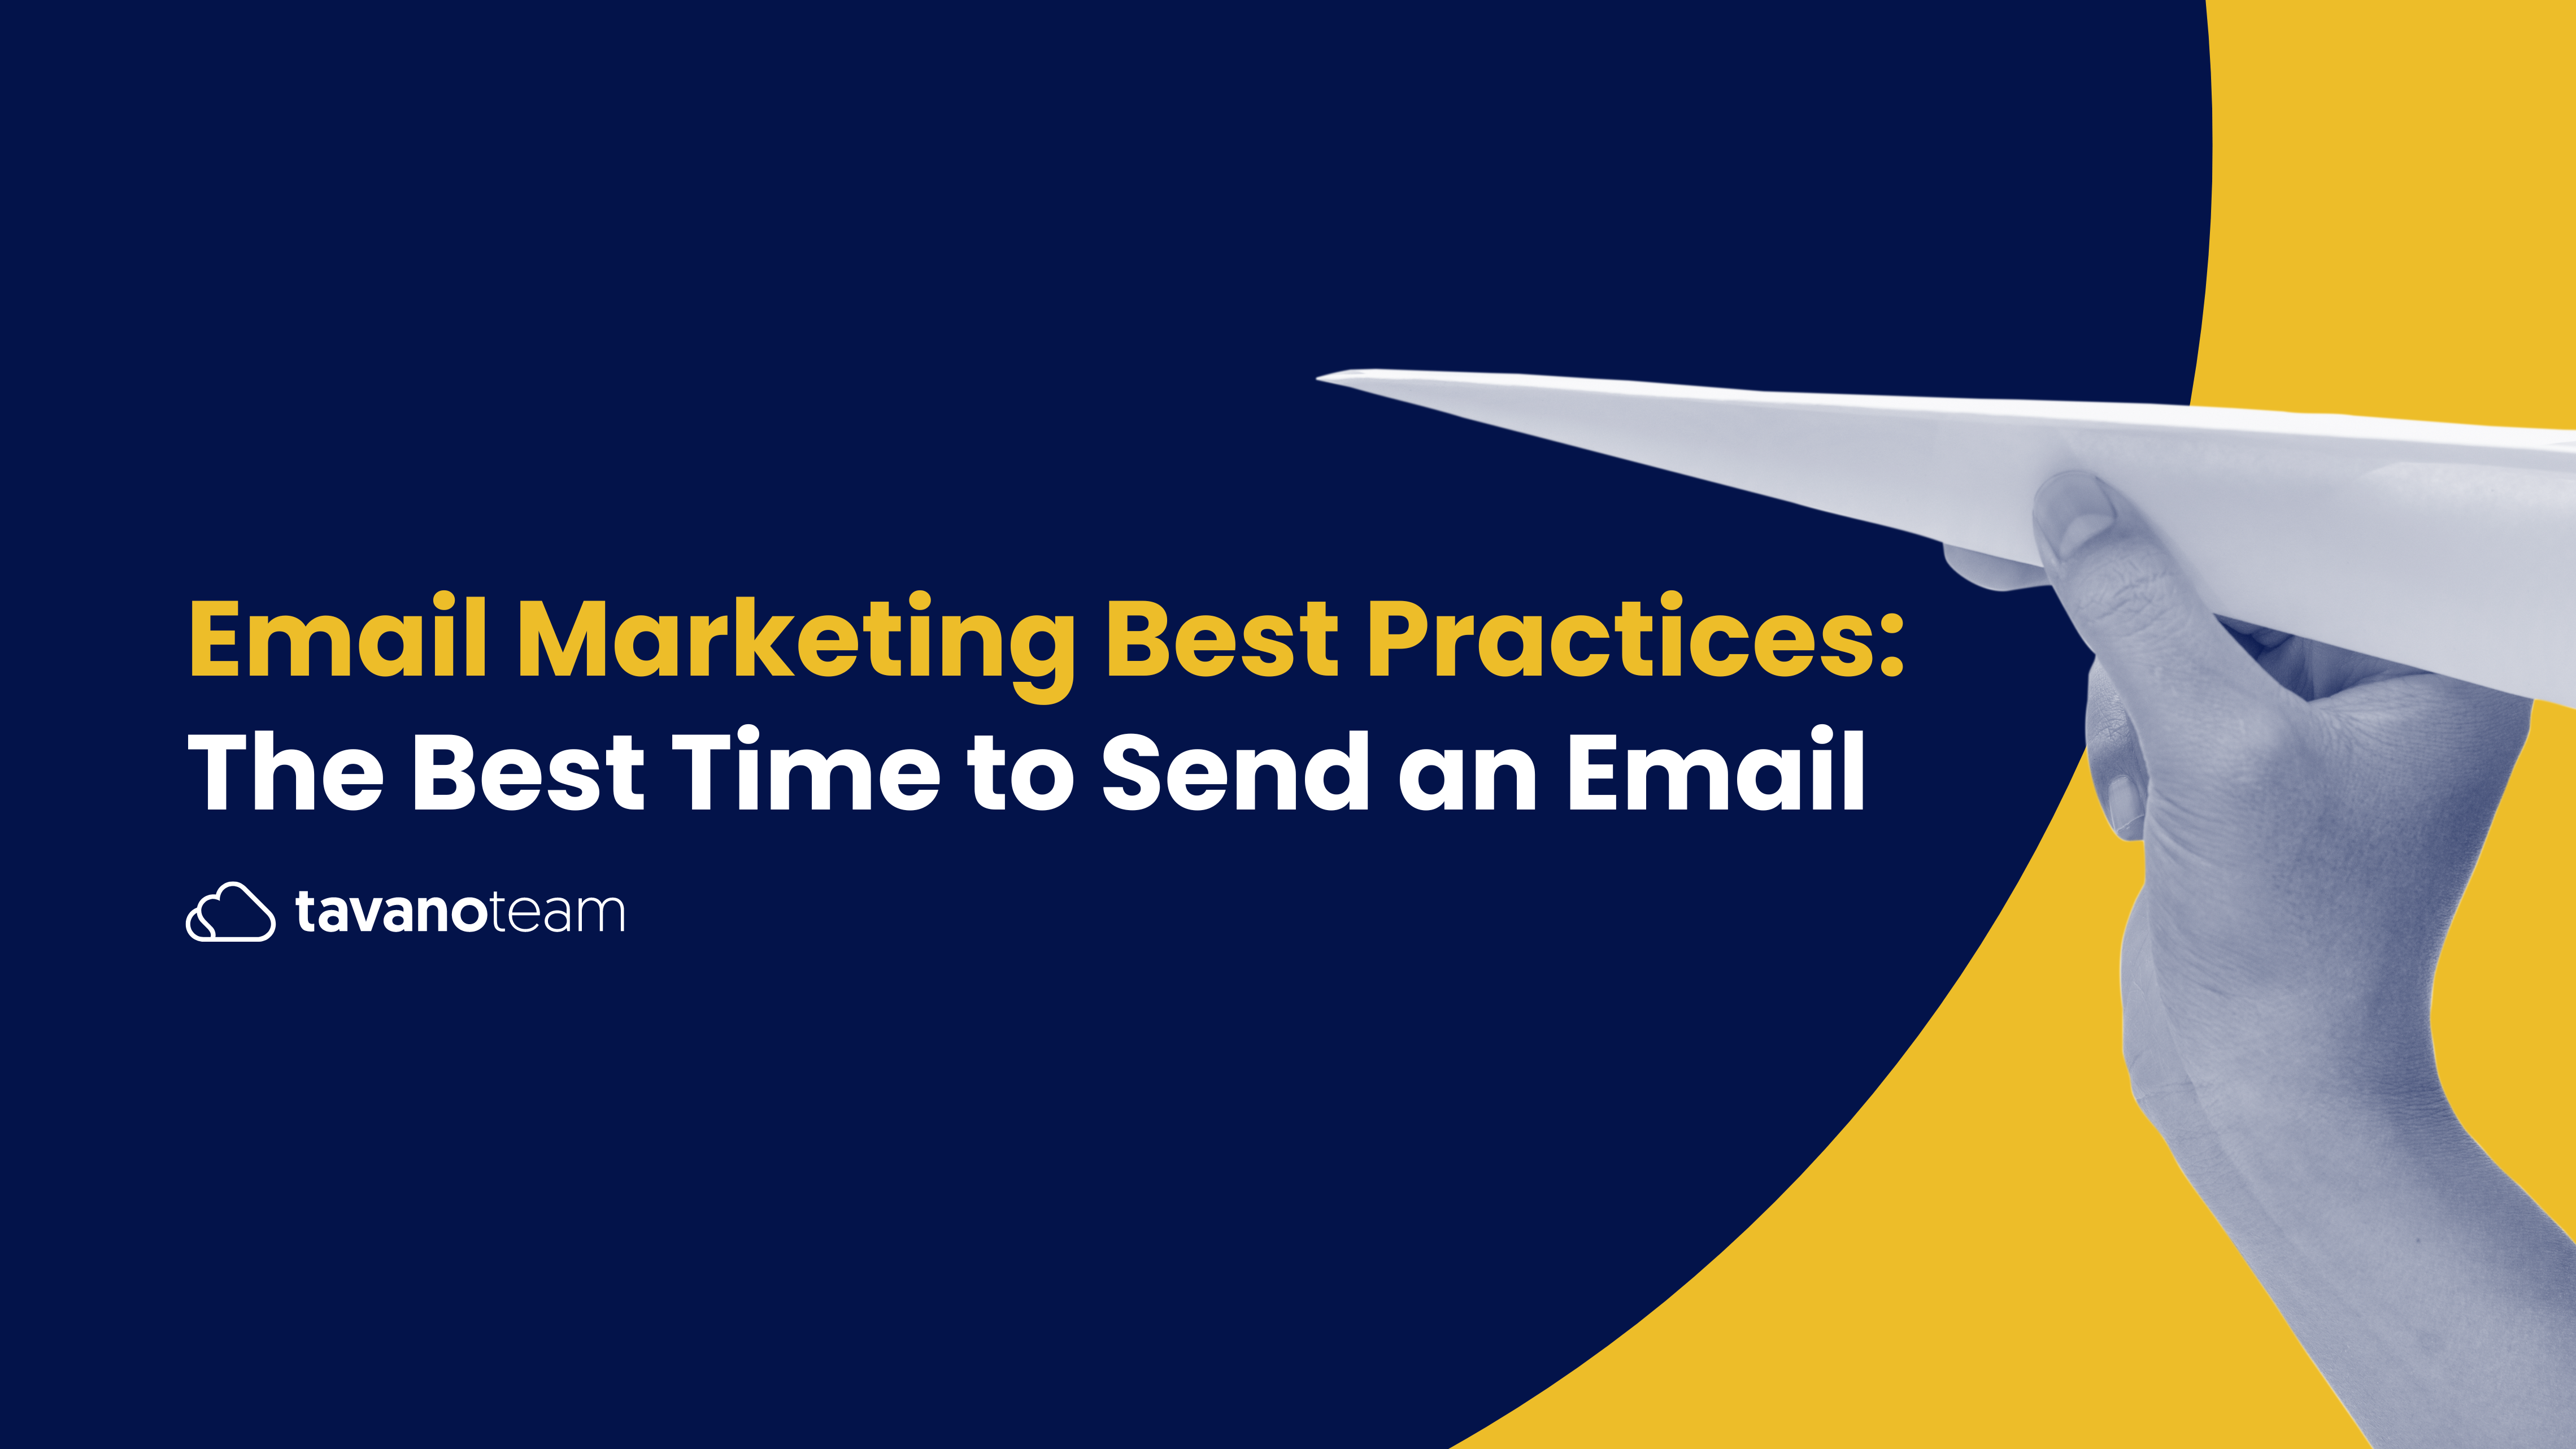 Email-Marketing-Best-Practices-The-Best-Time-to-Send-an-Email